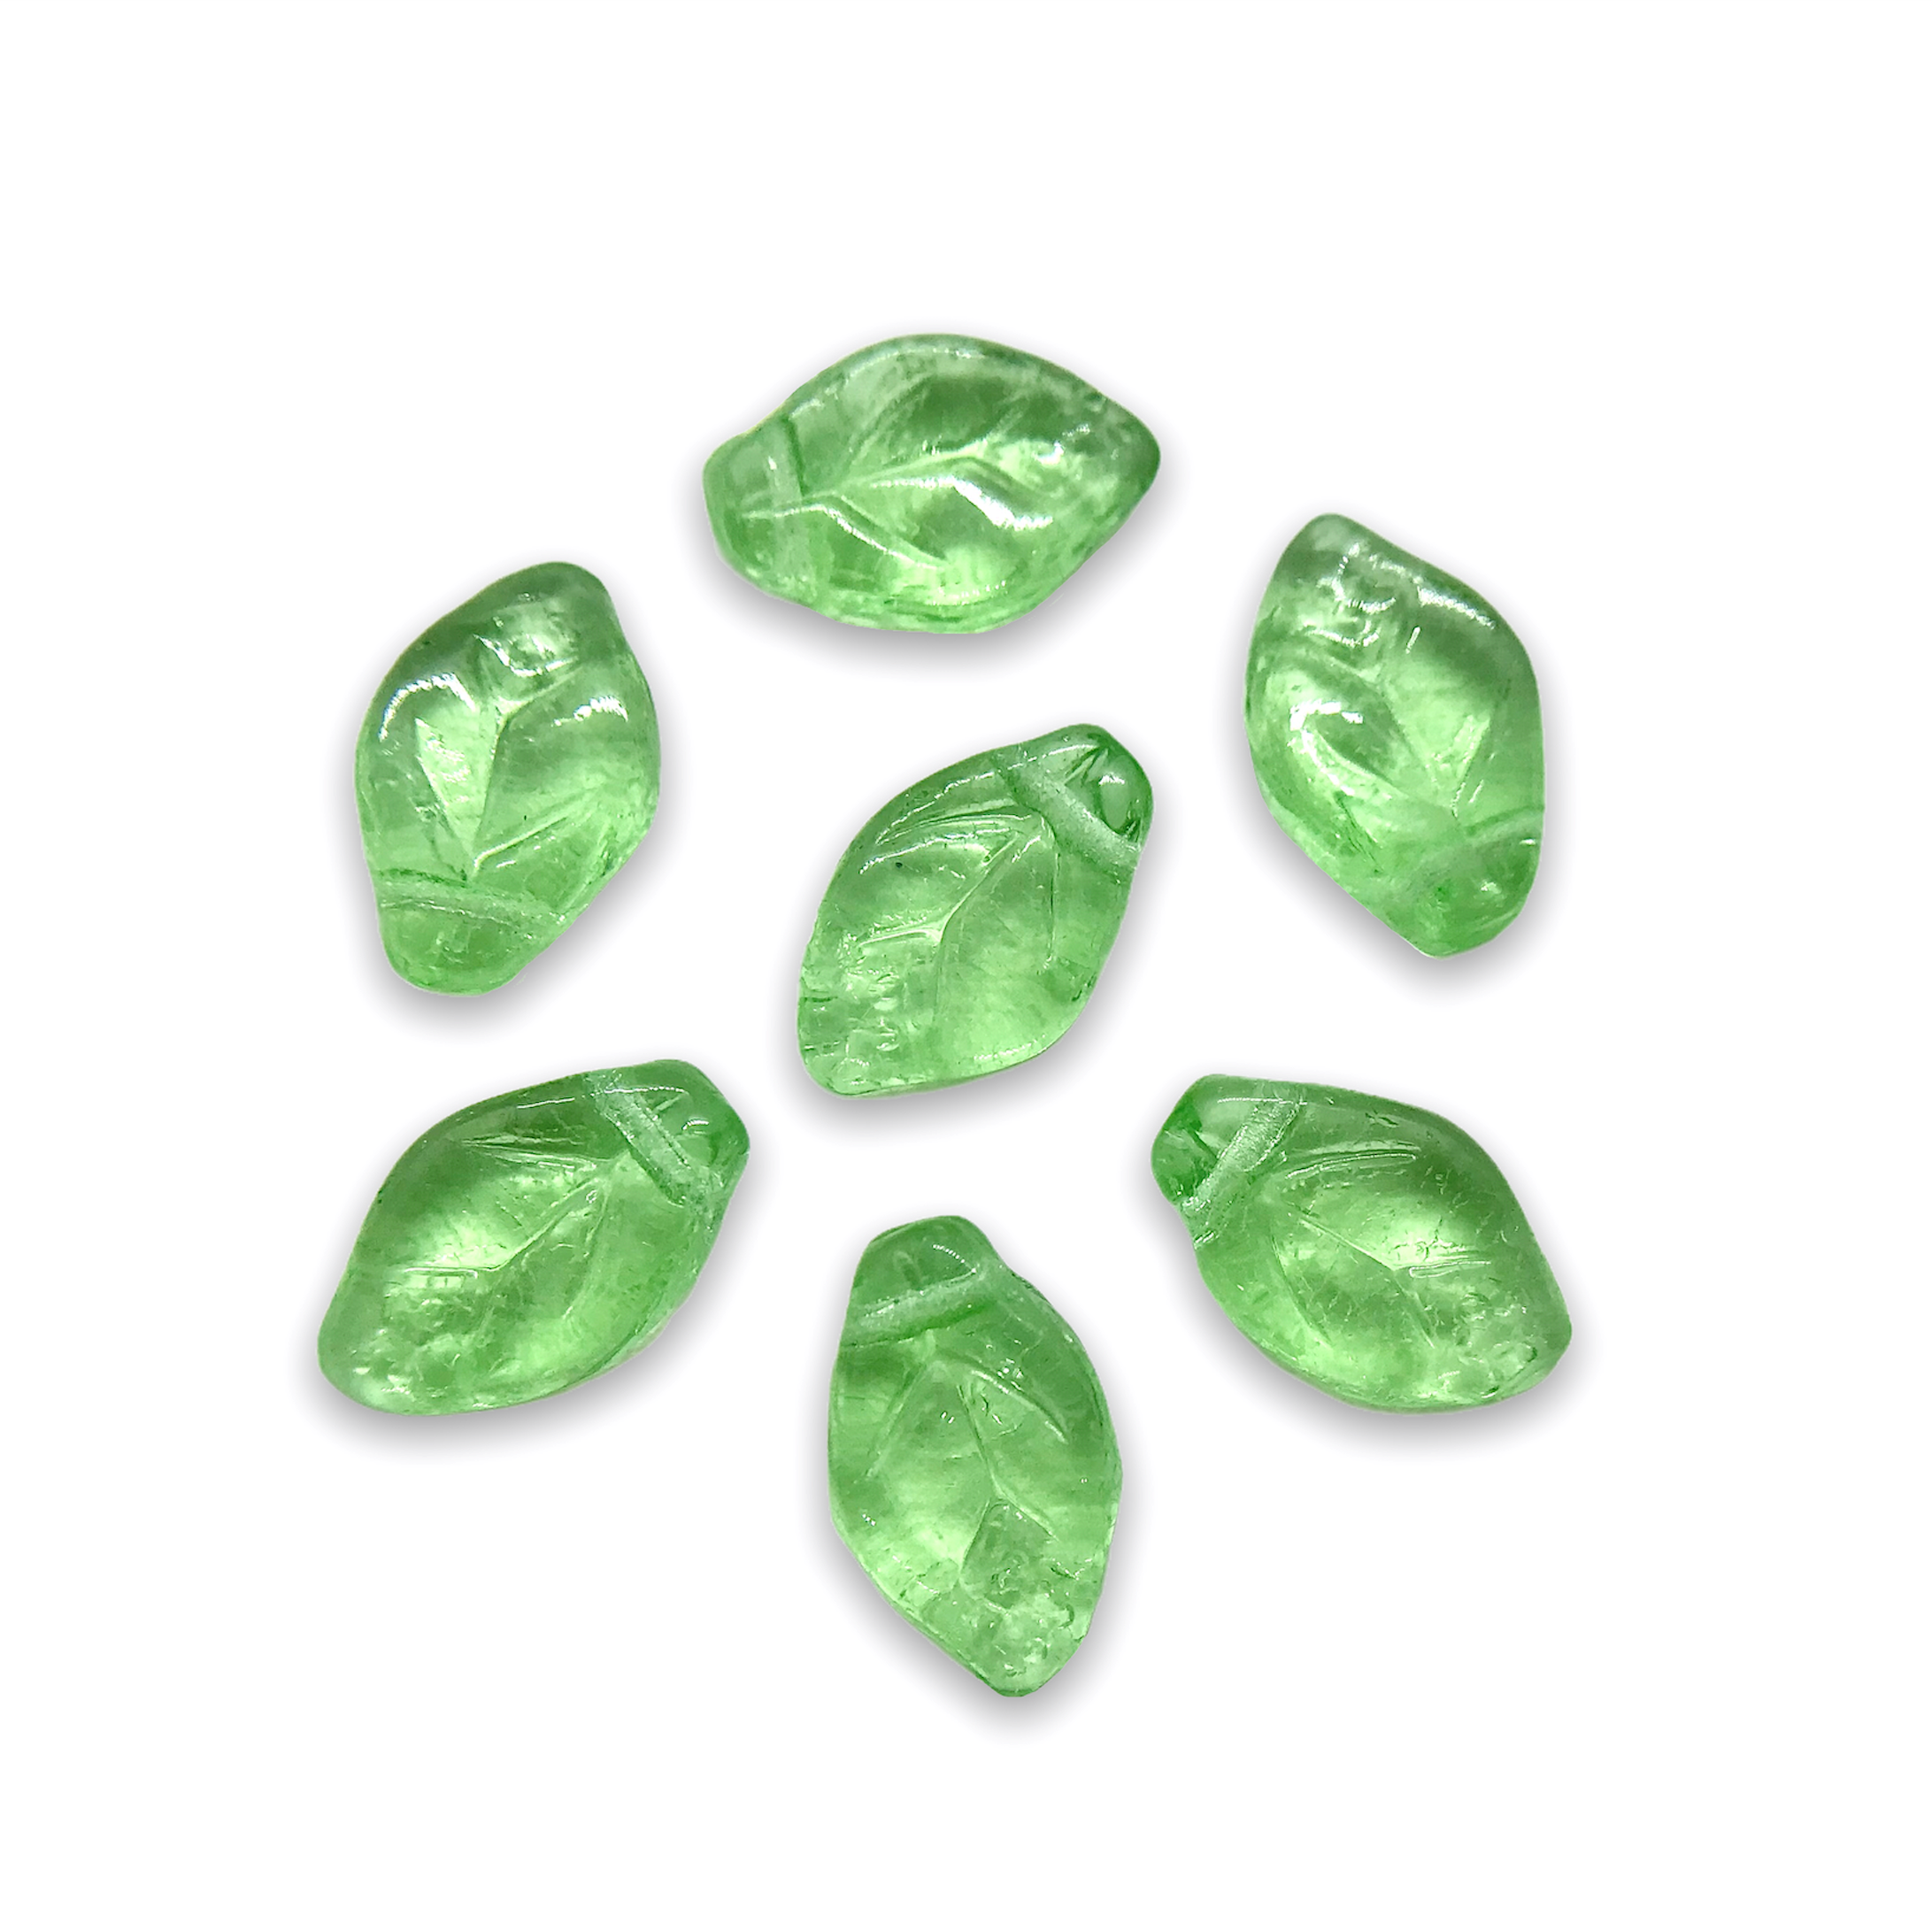 5x10mm Transparent Glass Beads Green Leaf Shape Crystal Beads